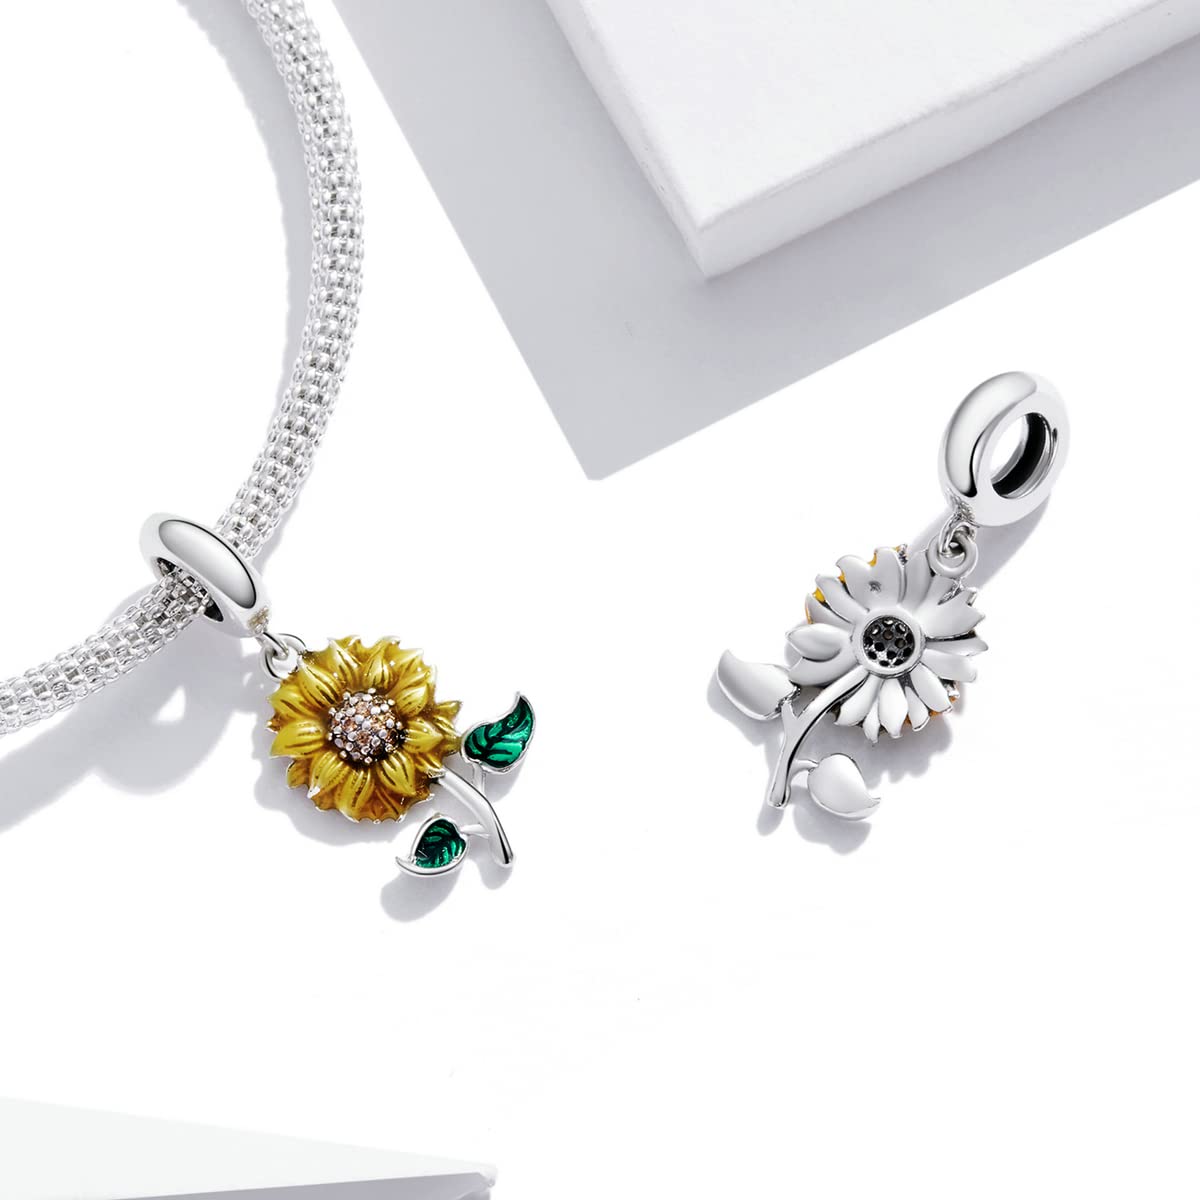 Sunflower Charms Sterling Silver Charms fit Pandora Charms Bracelet You are My Sunshine Charms Pendant Necklaces Jewelry Gifts for Women Girls Mom Wife